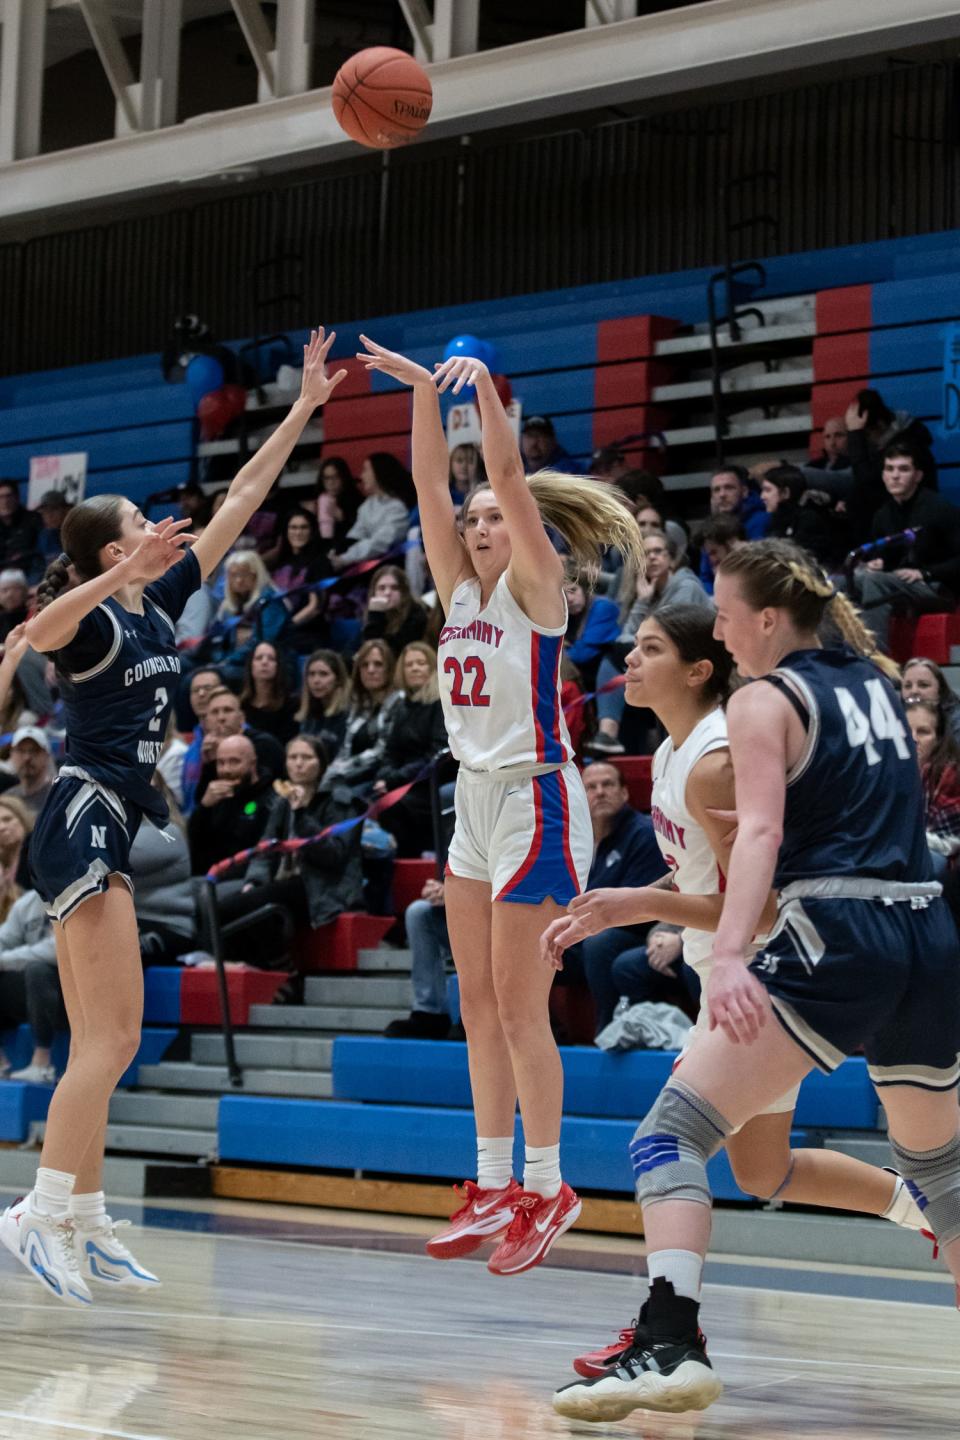 Neshaminy's Reese Zemitis shoots her first 3-pointer of the night on her way to breaking her school's all-time scoring record in a girls basketball game against Council Rock North on Feb. 2.